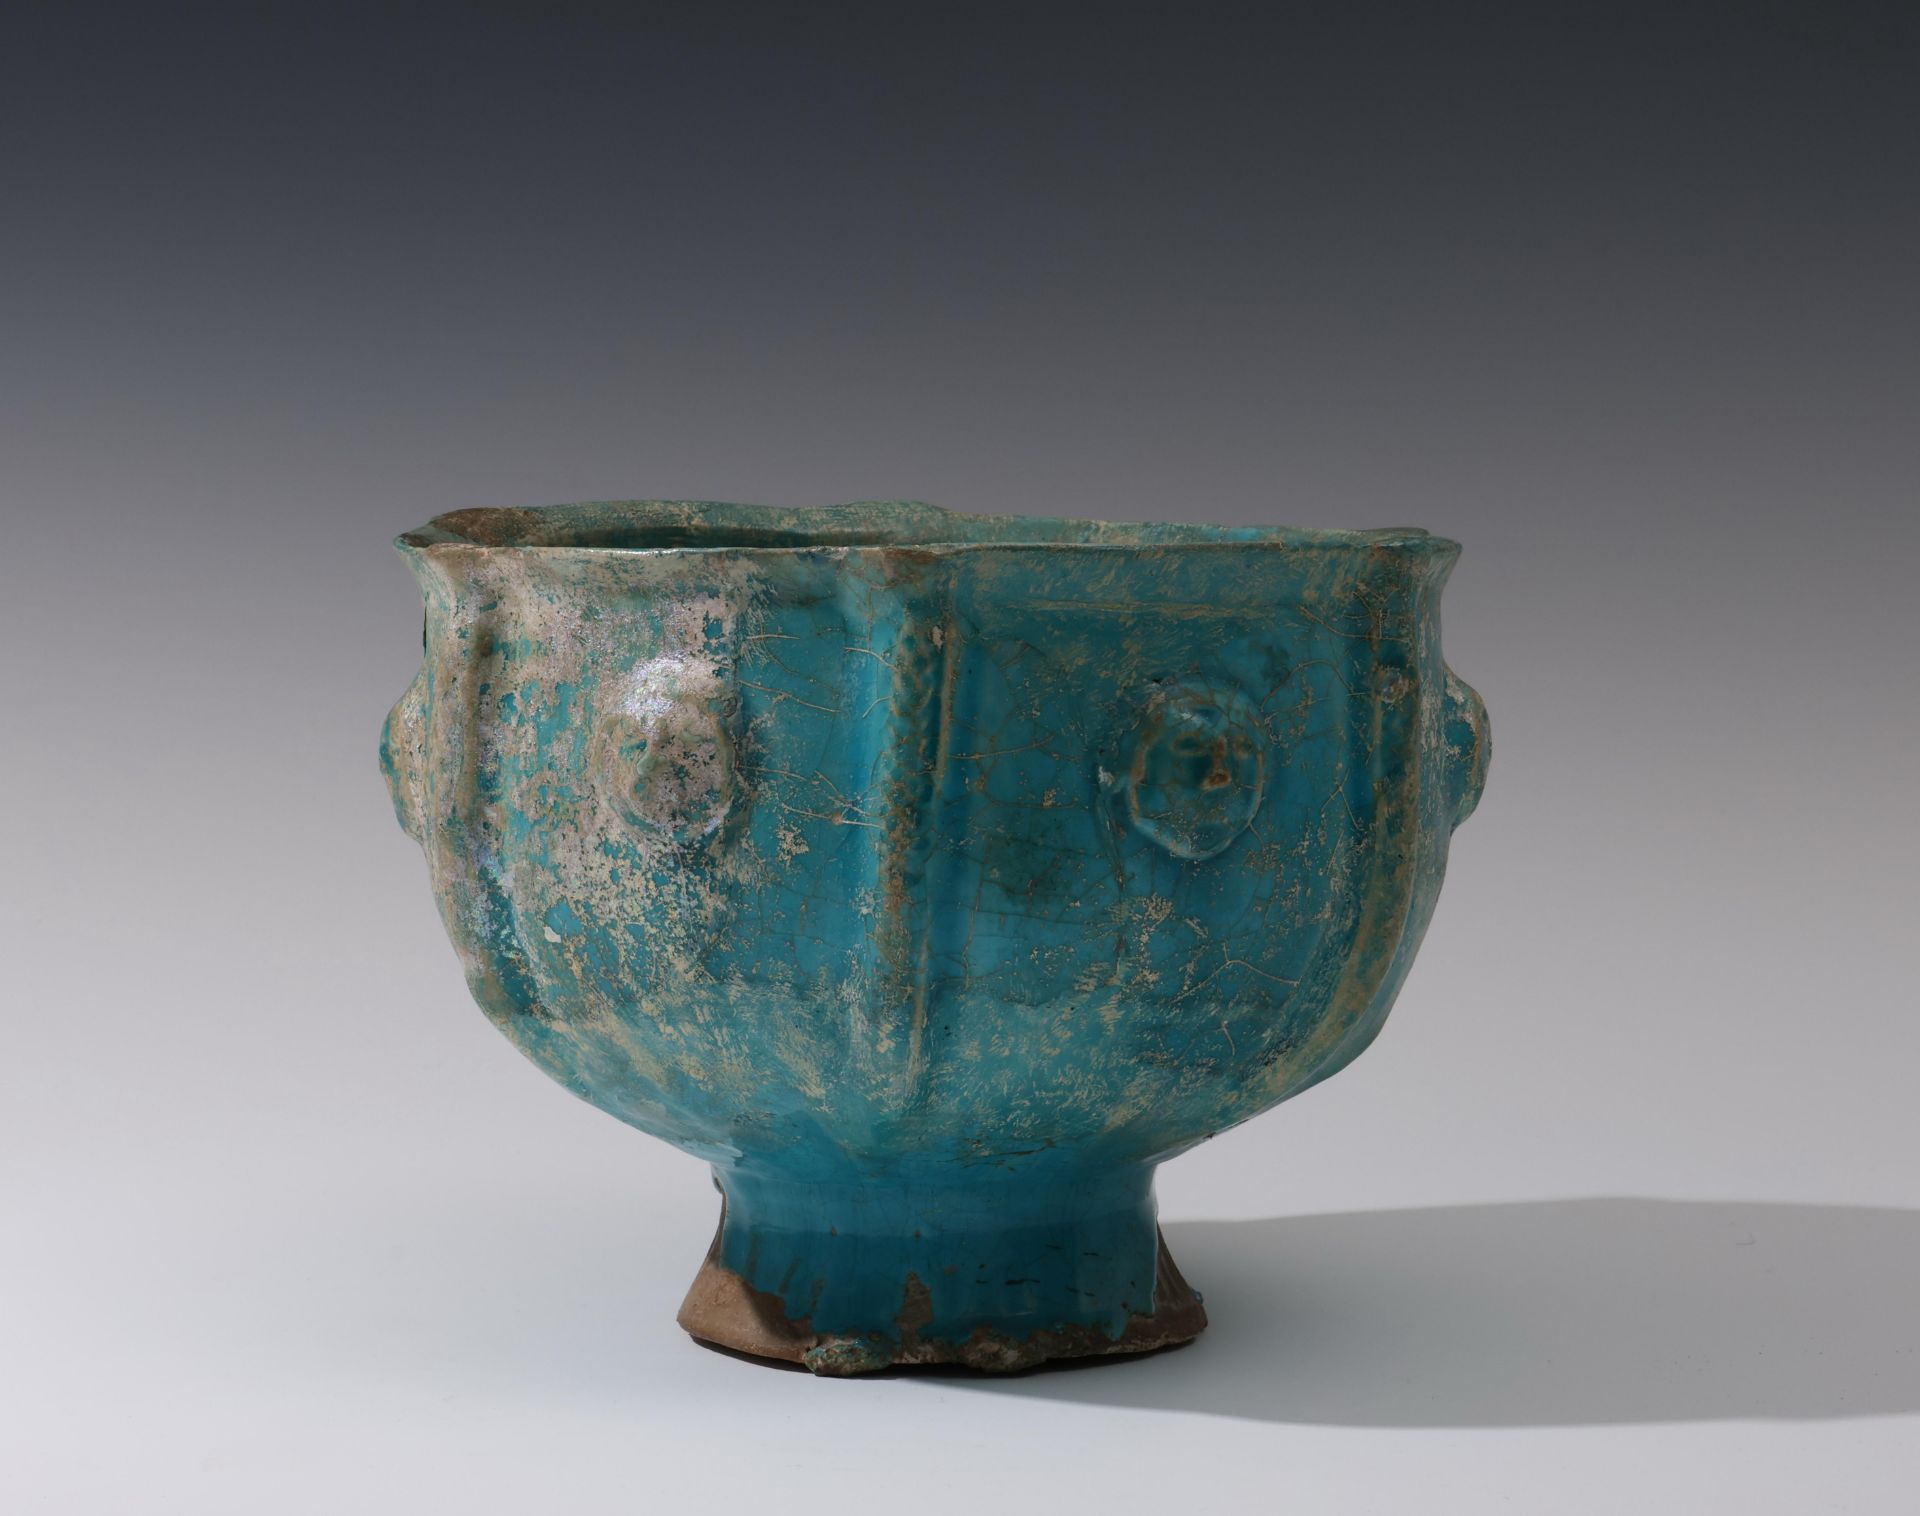 Persia, Seljuk, bowl, 12th century or later - Image 3 of 3